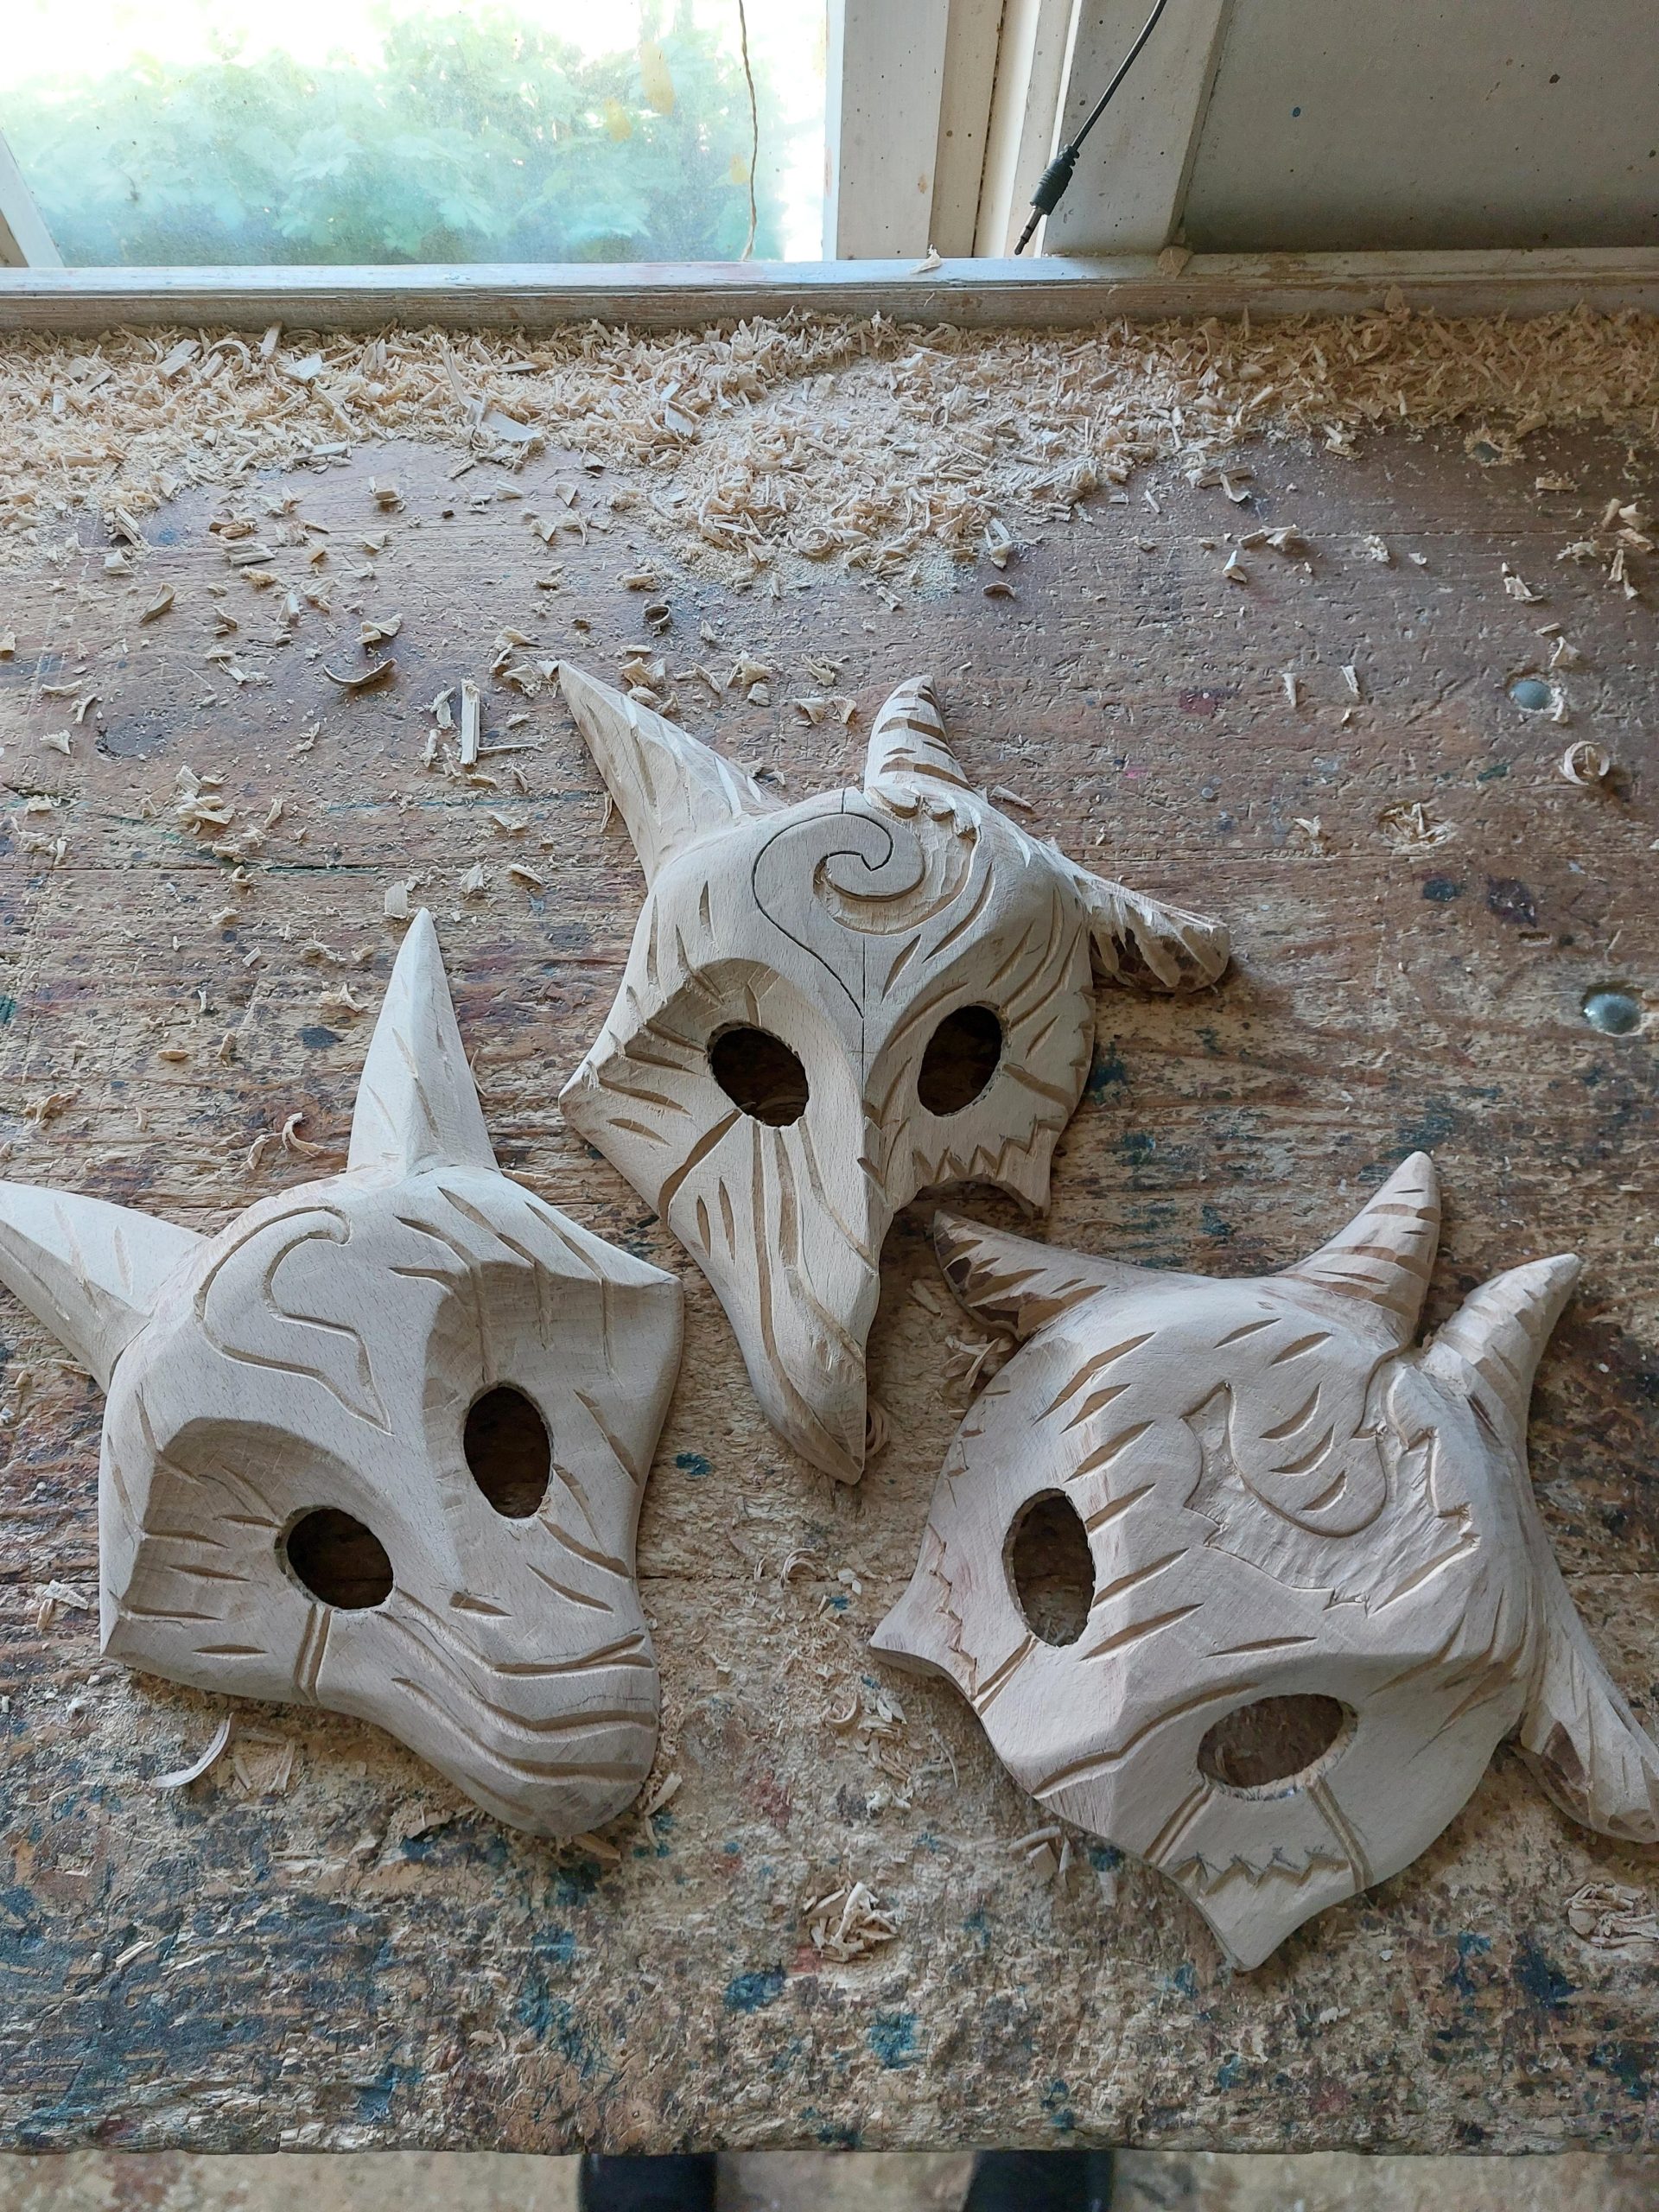 Kindred masks from League of Legends. Work in development.